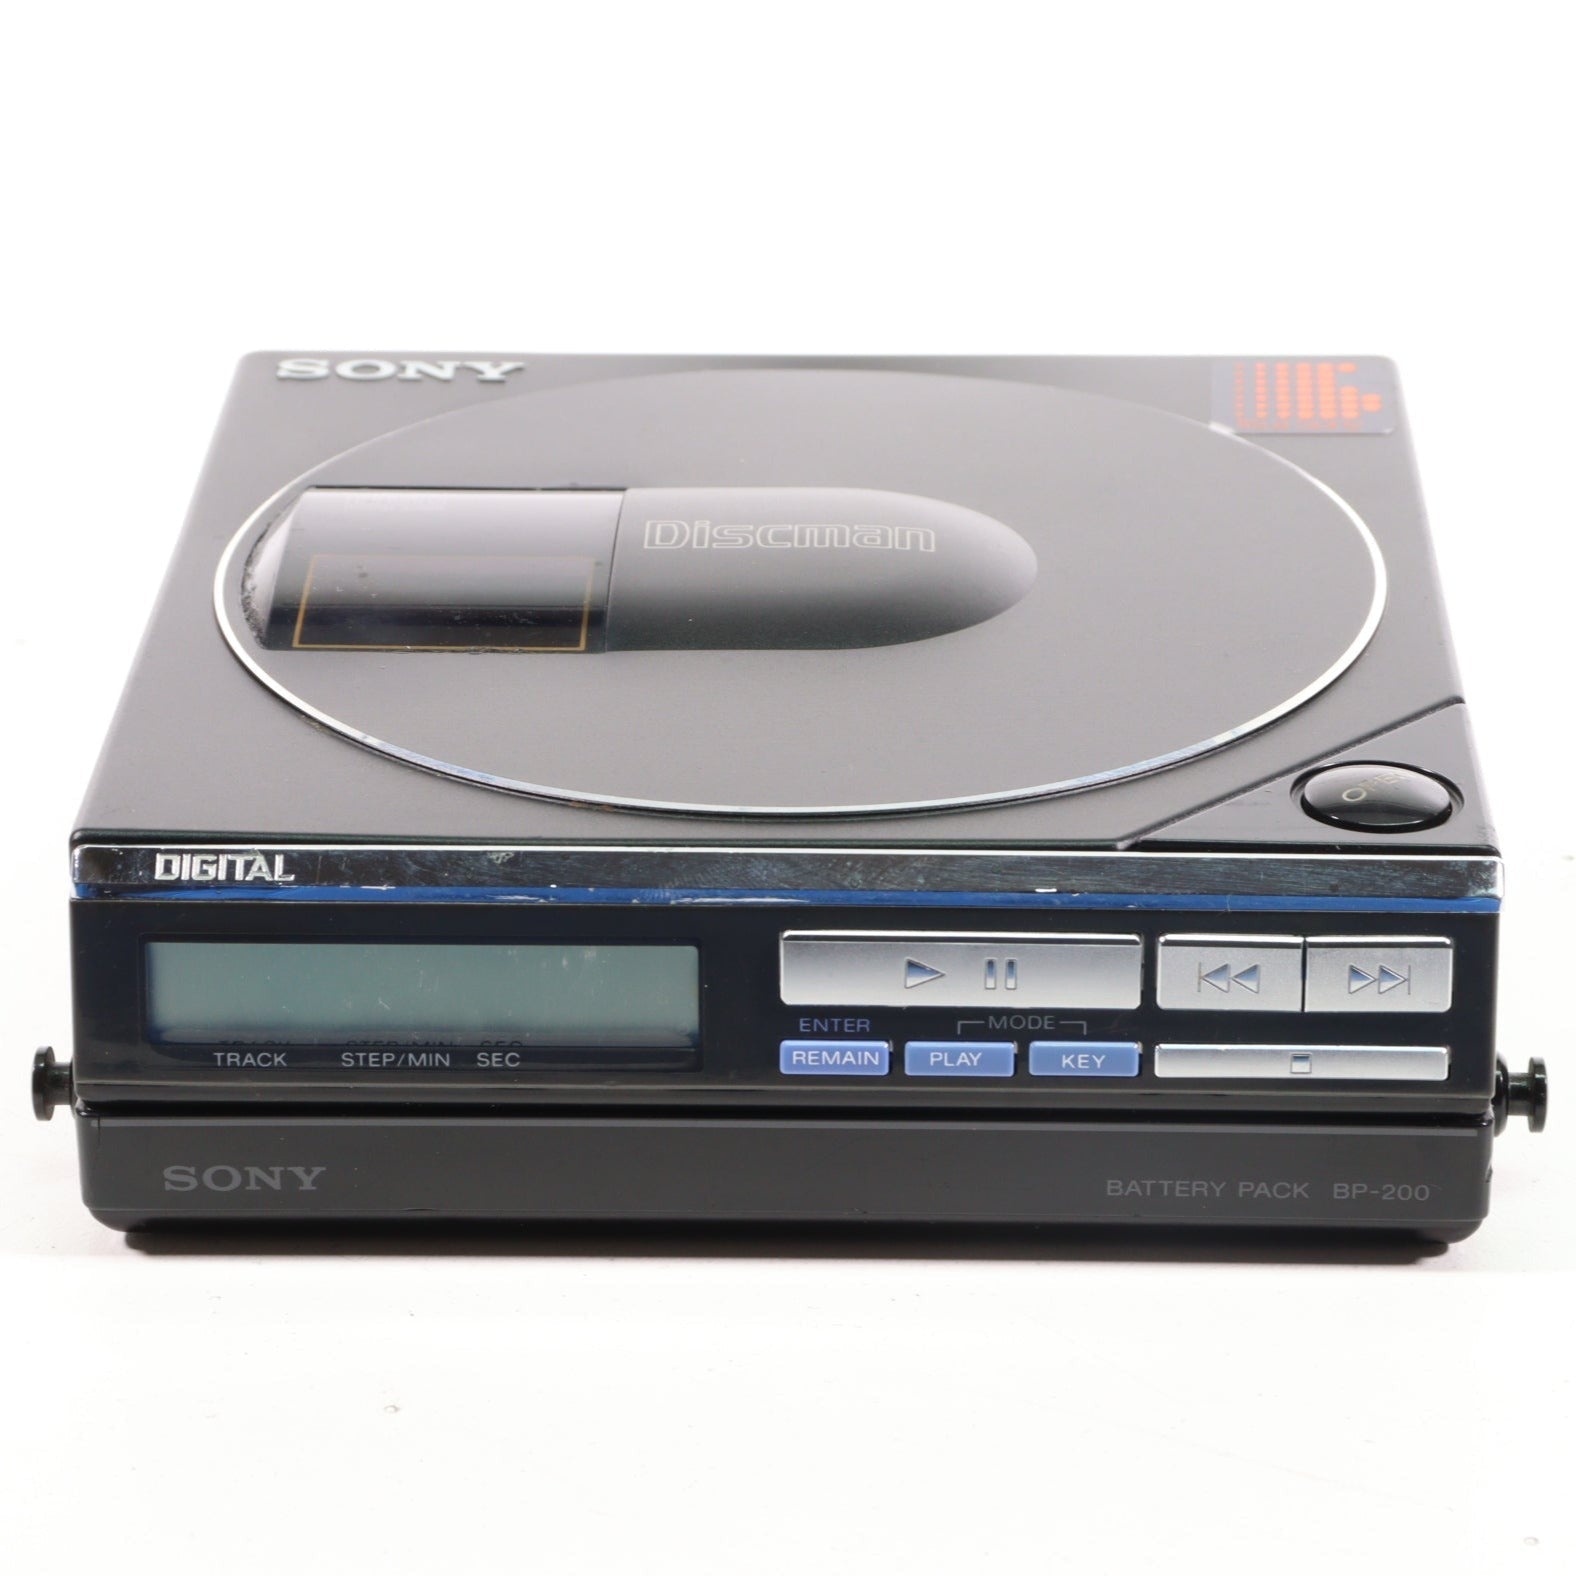 Sony Discman D7 Personal CD Player with BP-200 Battery Pack and Case (